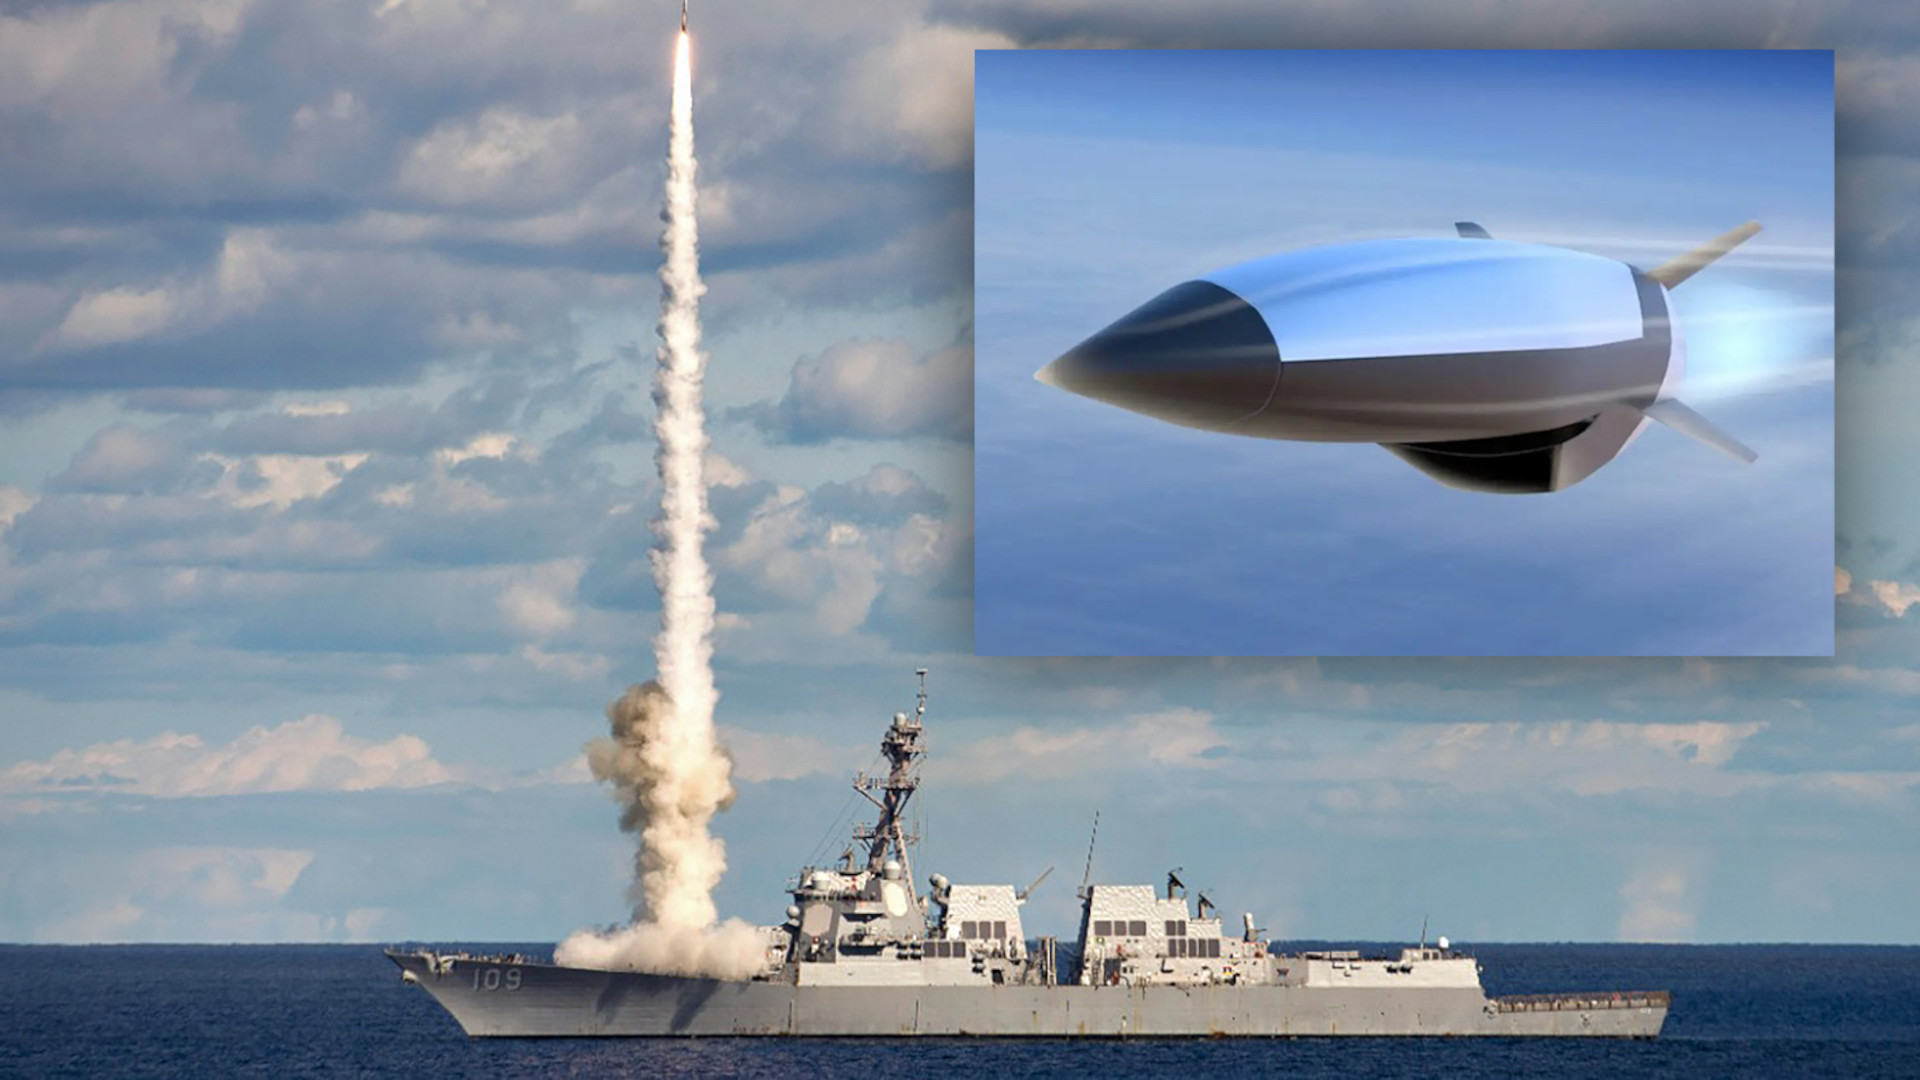 The Navy has been eying the possibility of arming its ships and submarines, as well as aircraft, with a new air-breathing hypersonic anti-ship cruise missile.